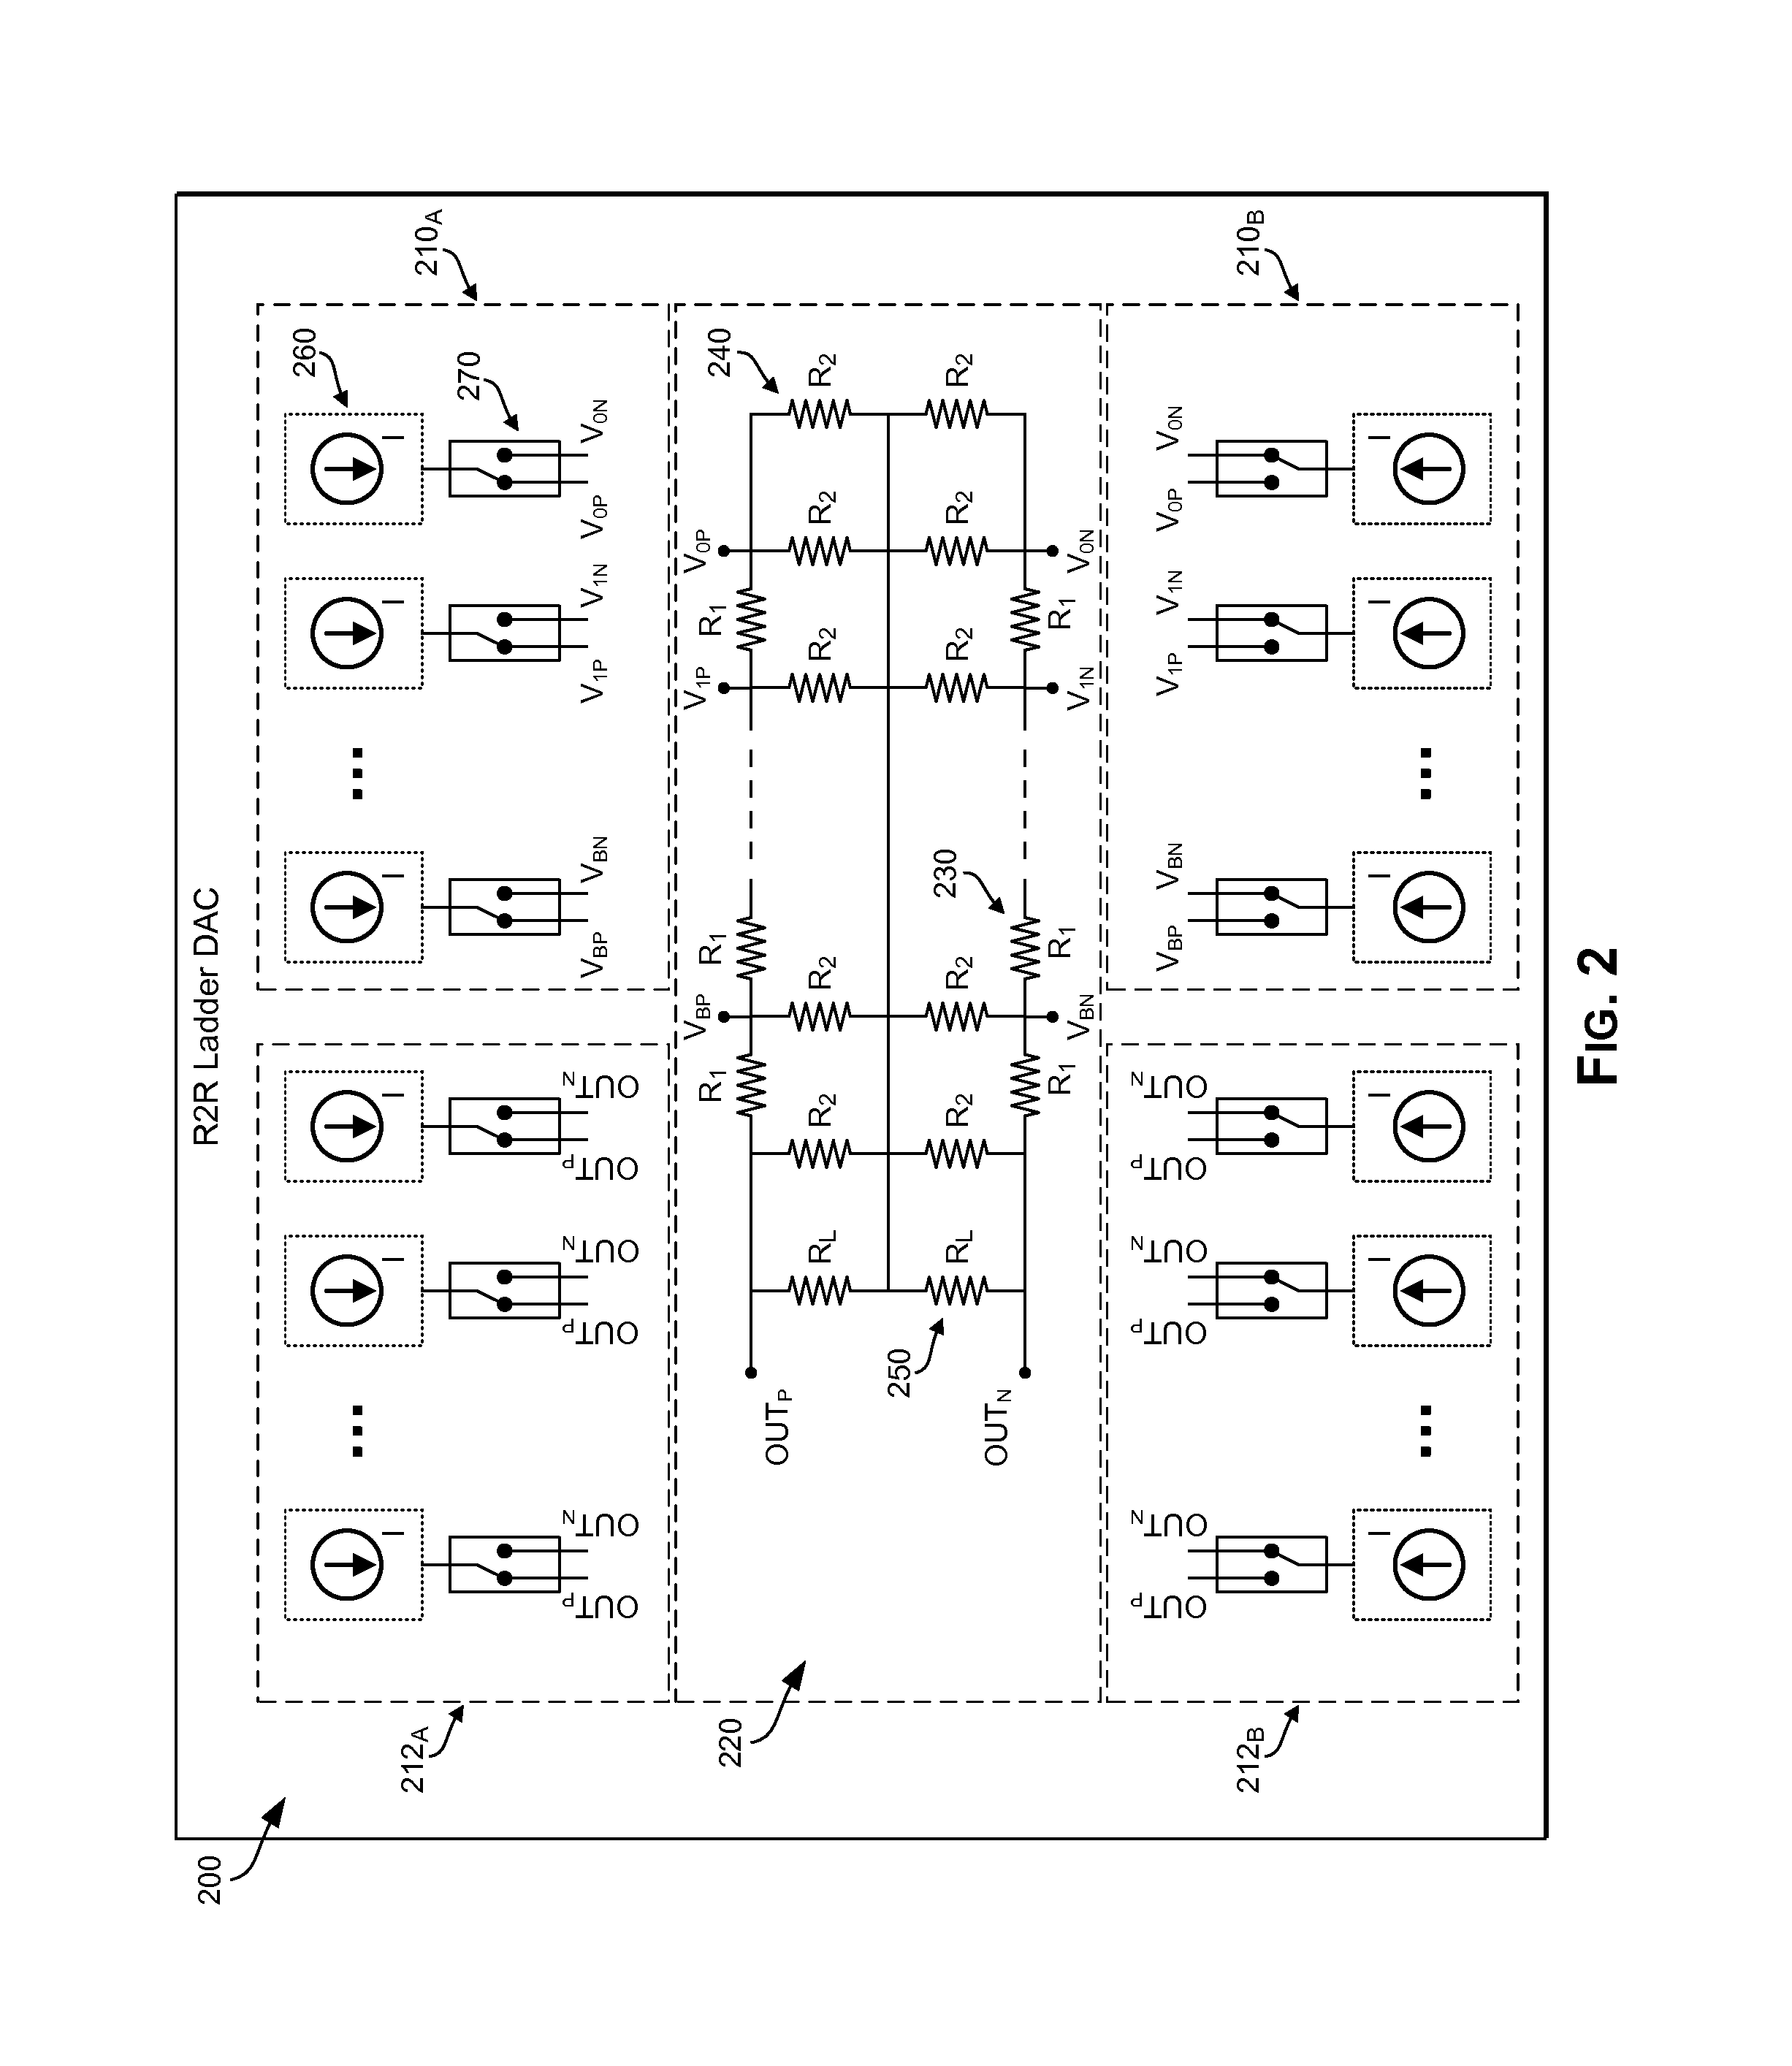 Calibration of an R2R ladder based current digital-to-analog converter (DAC)